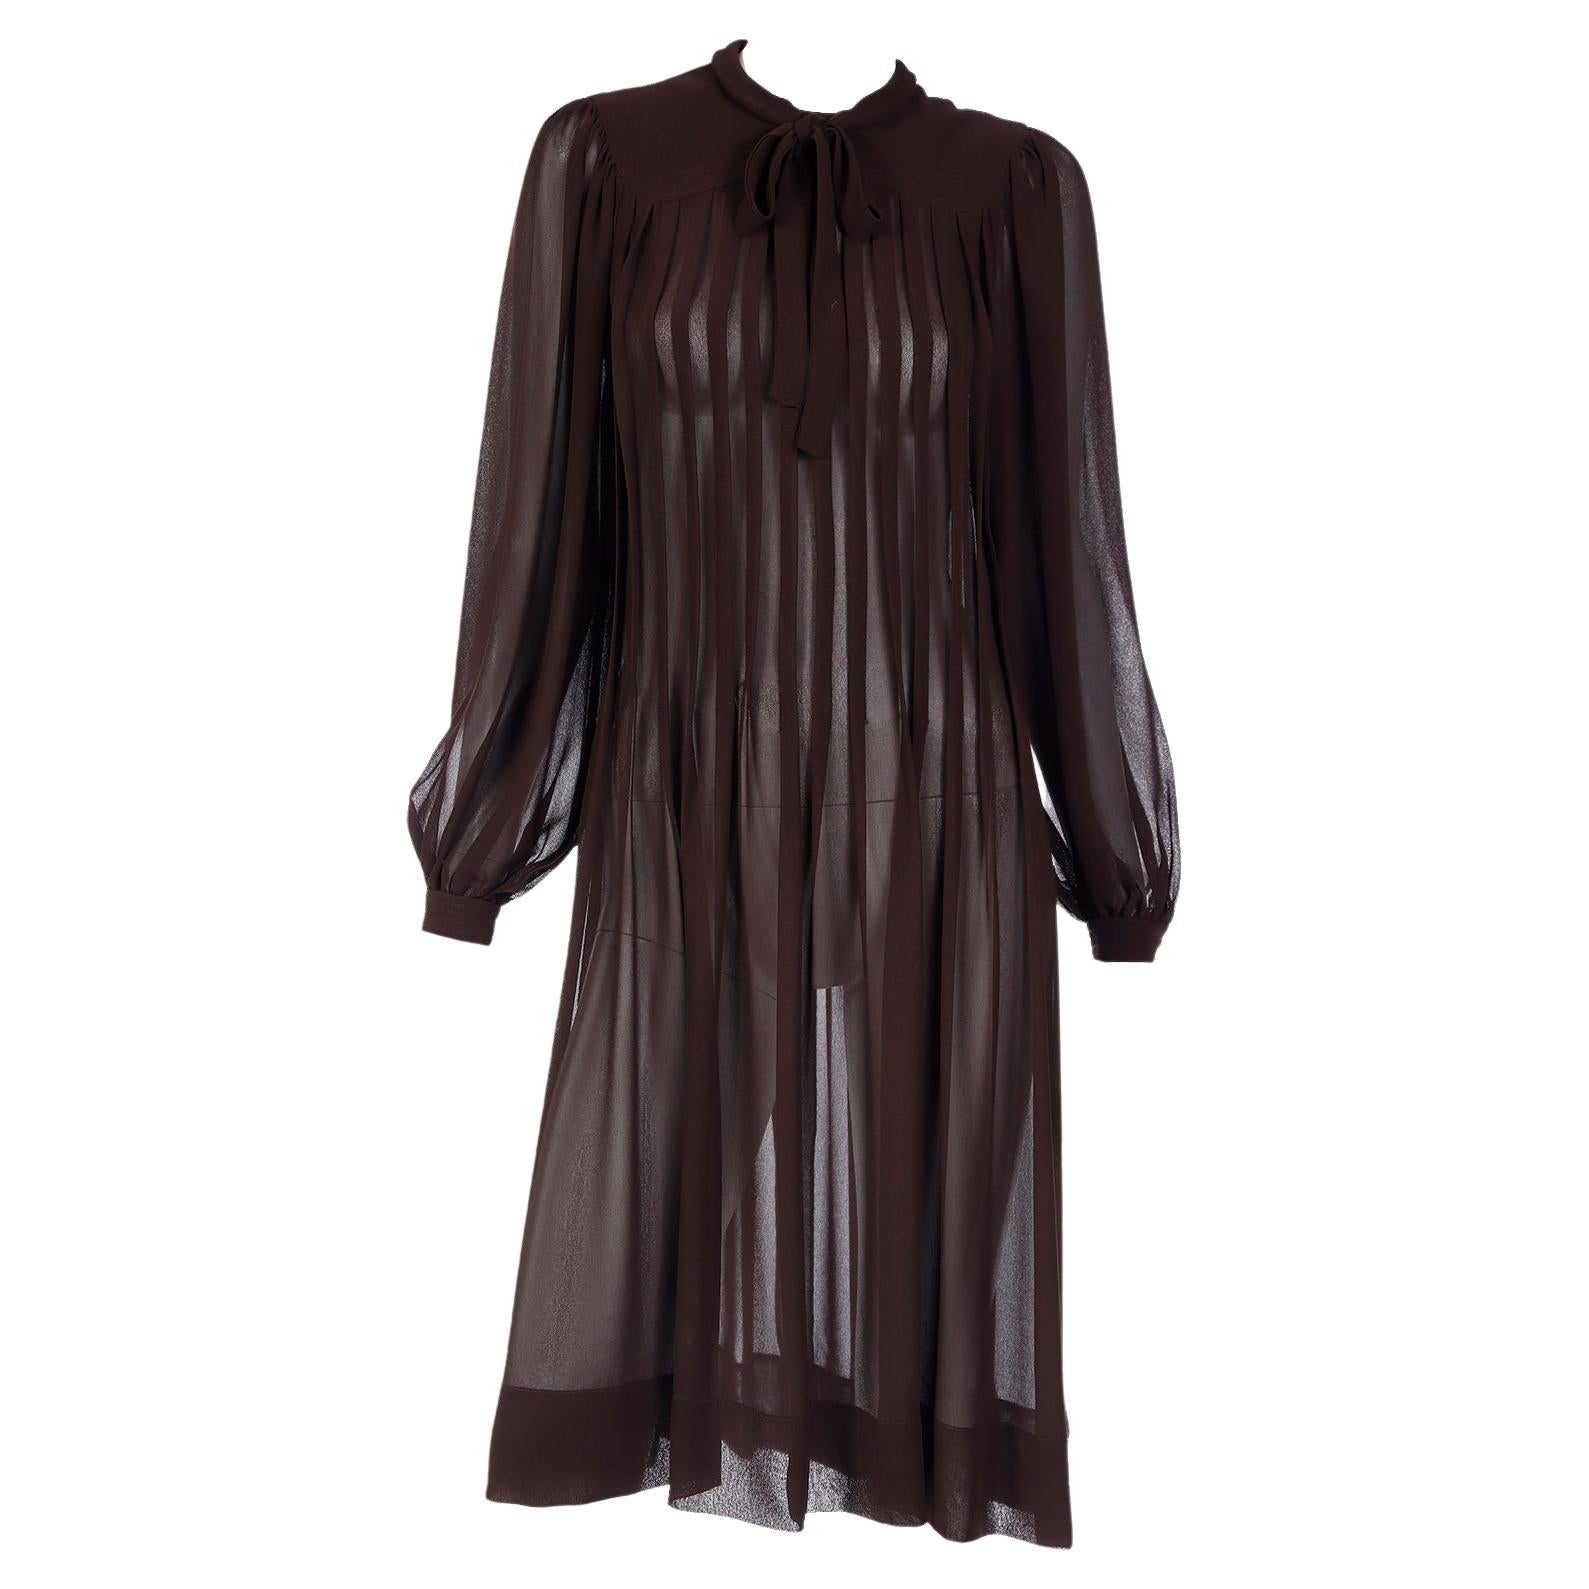 Vintage Albert Nipon 1970s Pleated Brown Semi Sheer Dress With Bow For Sale